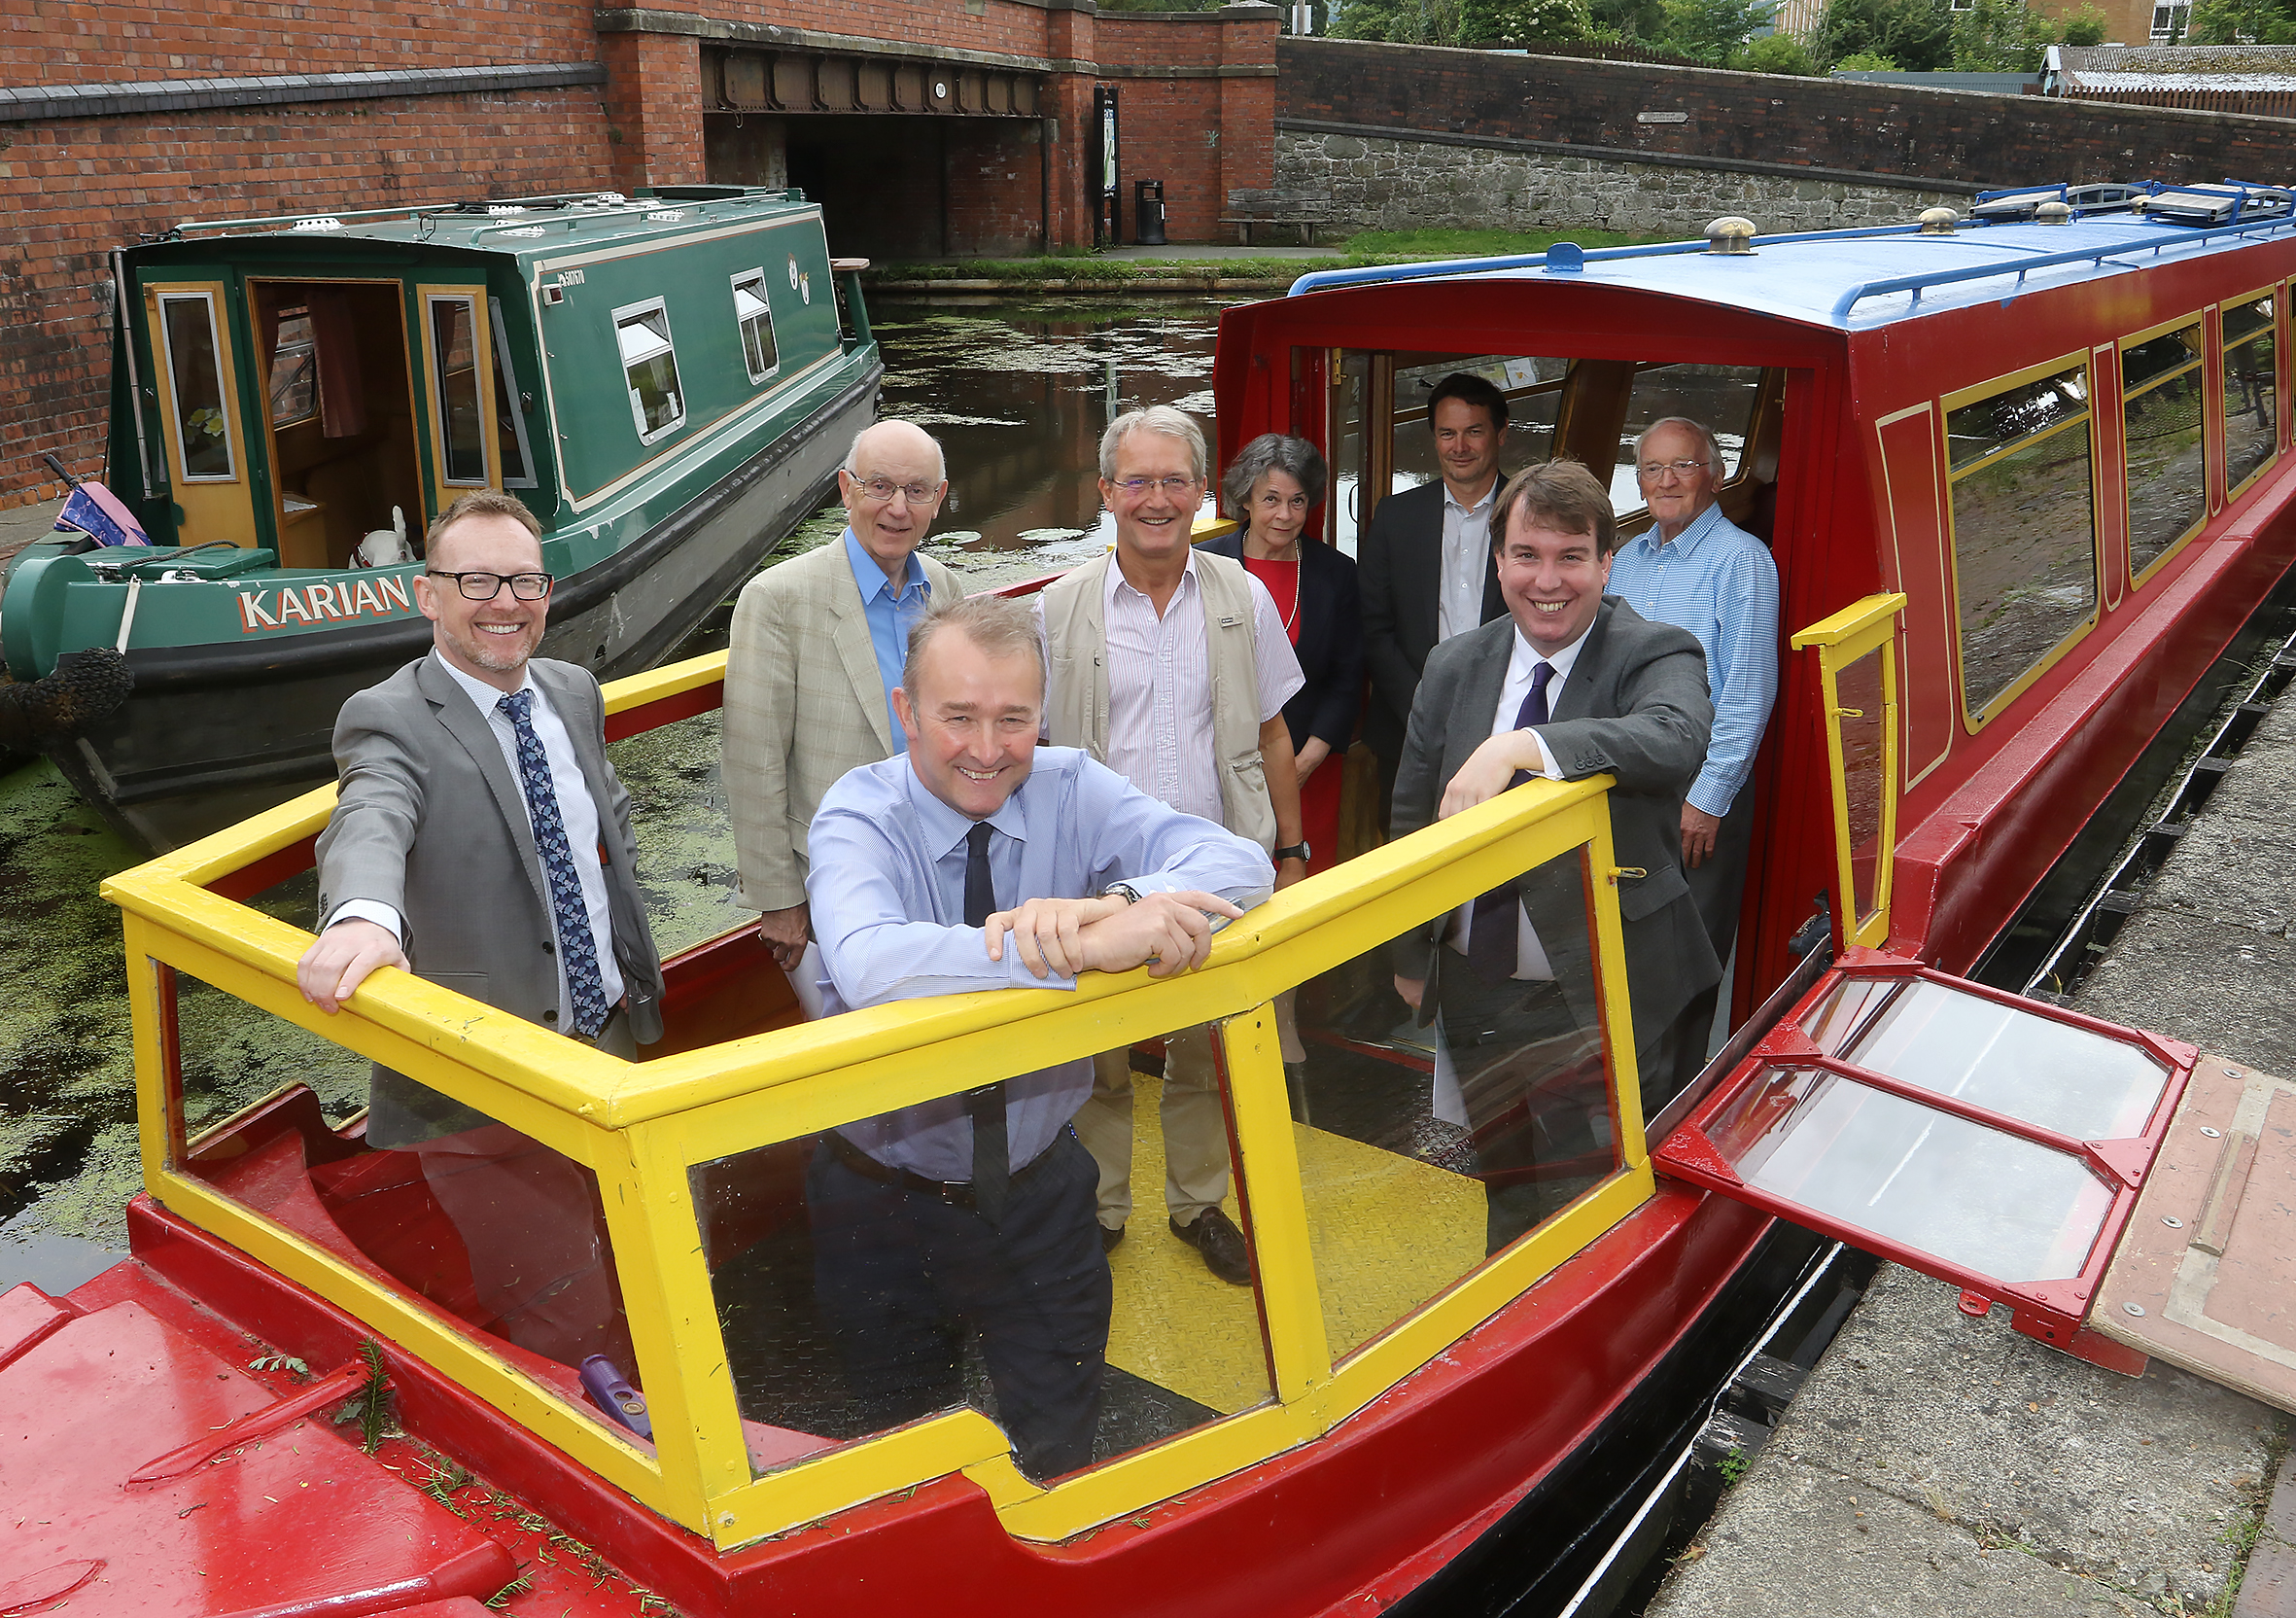 Visit to Welshpool Canal Wharf - (L-R) Russell George MS, John Dodwell – Chair of Montgomery Canal Partnership, Secretary of State for Wales Simon Hart, Owen Paterson MP, Cllr Rosemarie Harris – Leader of Powys County Council, Mark Evans - Director for Wales and South West from the Canal and River Trust/Glandwr Cymru, Craig Williams MP and Pat Ward – Vice-Chairman of the Heulwen Trust. Photo by Phil Blagg Photography